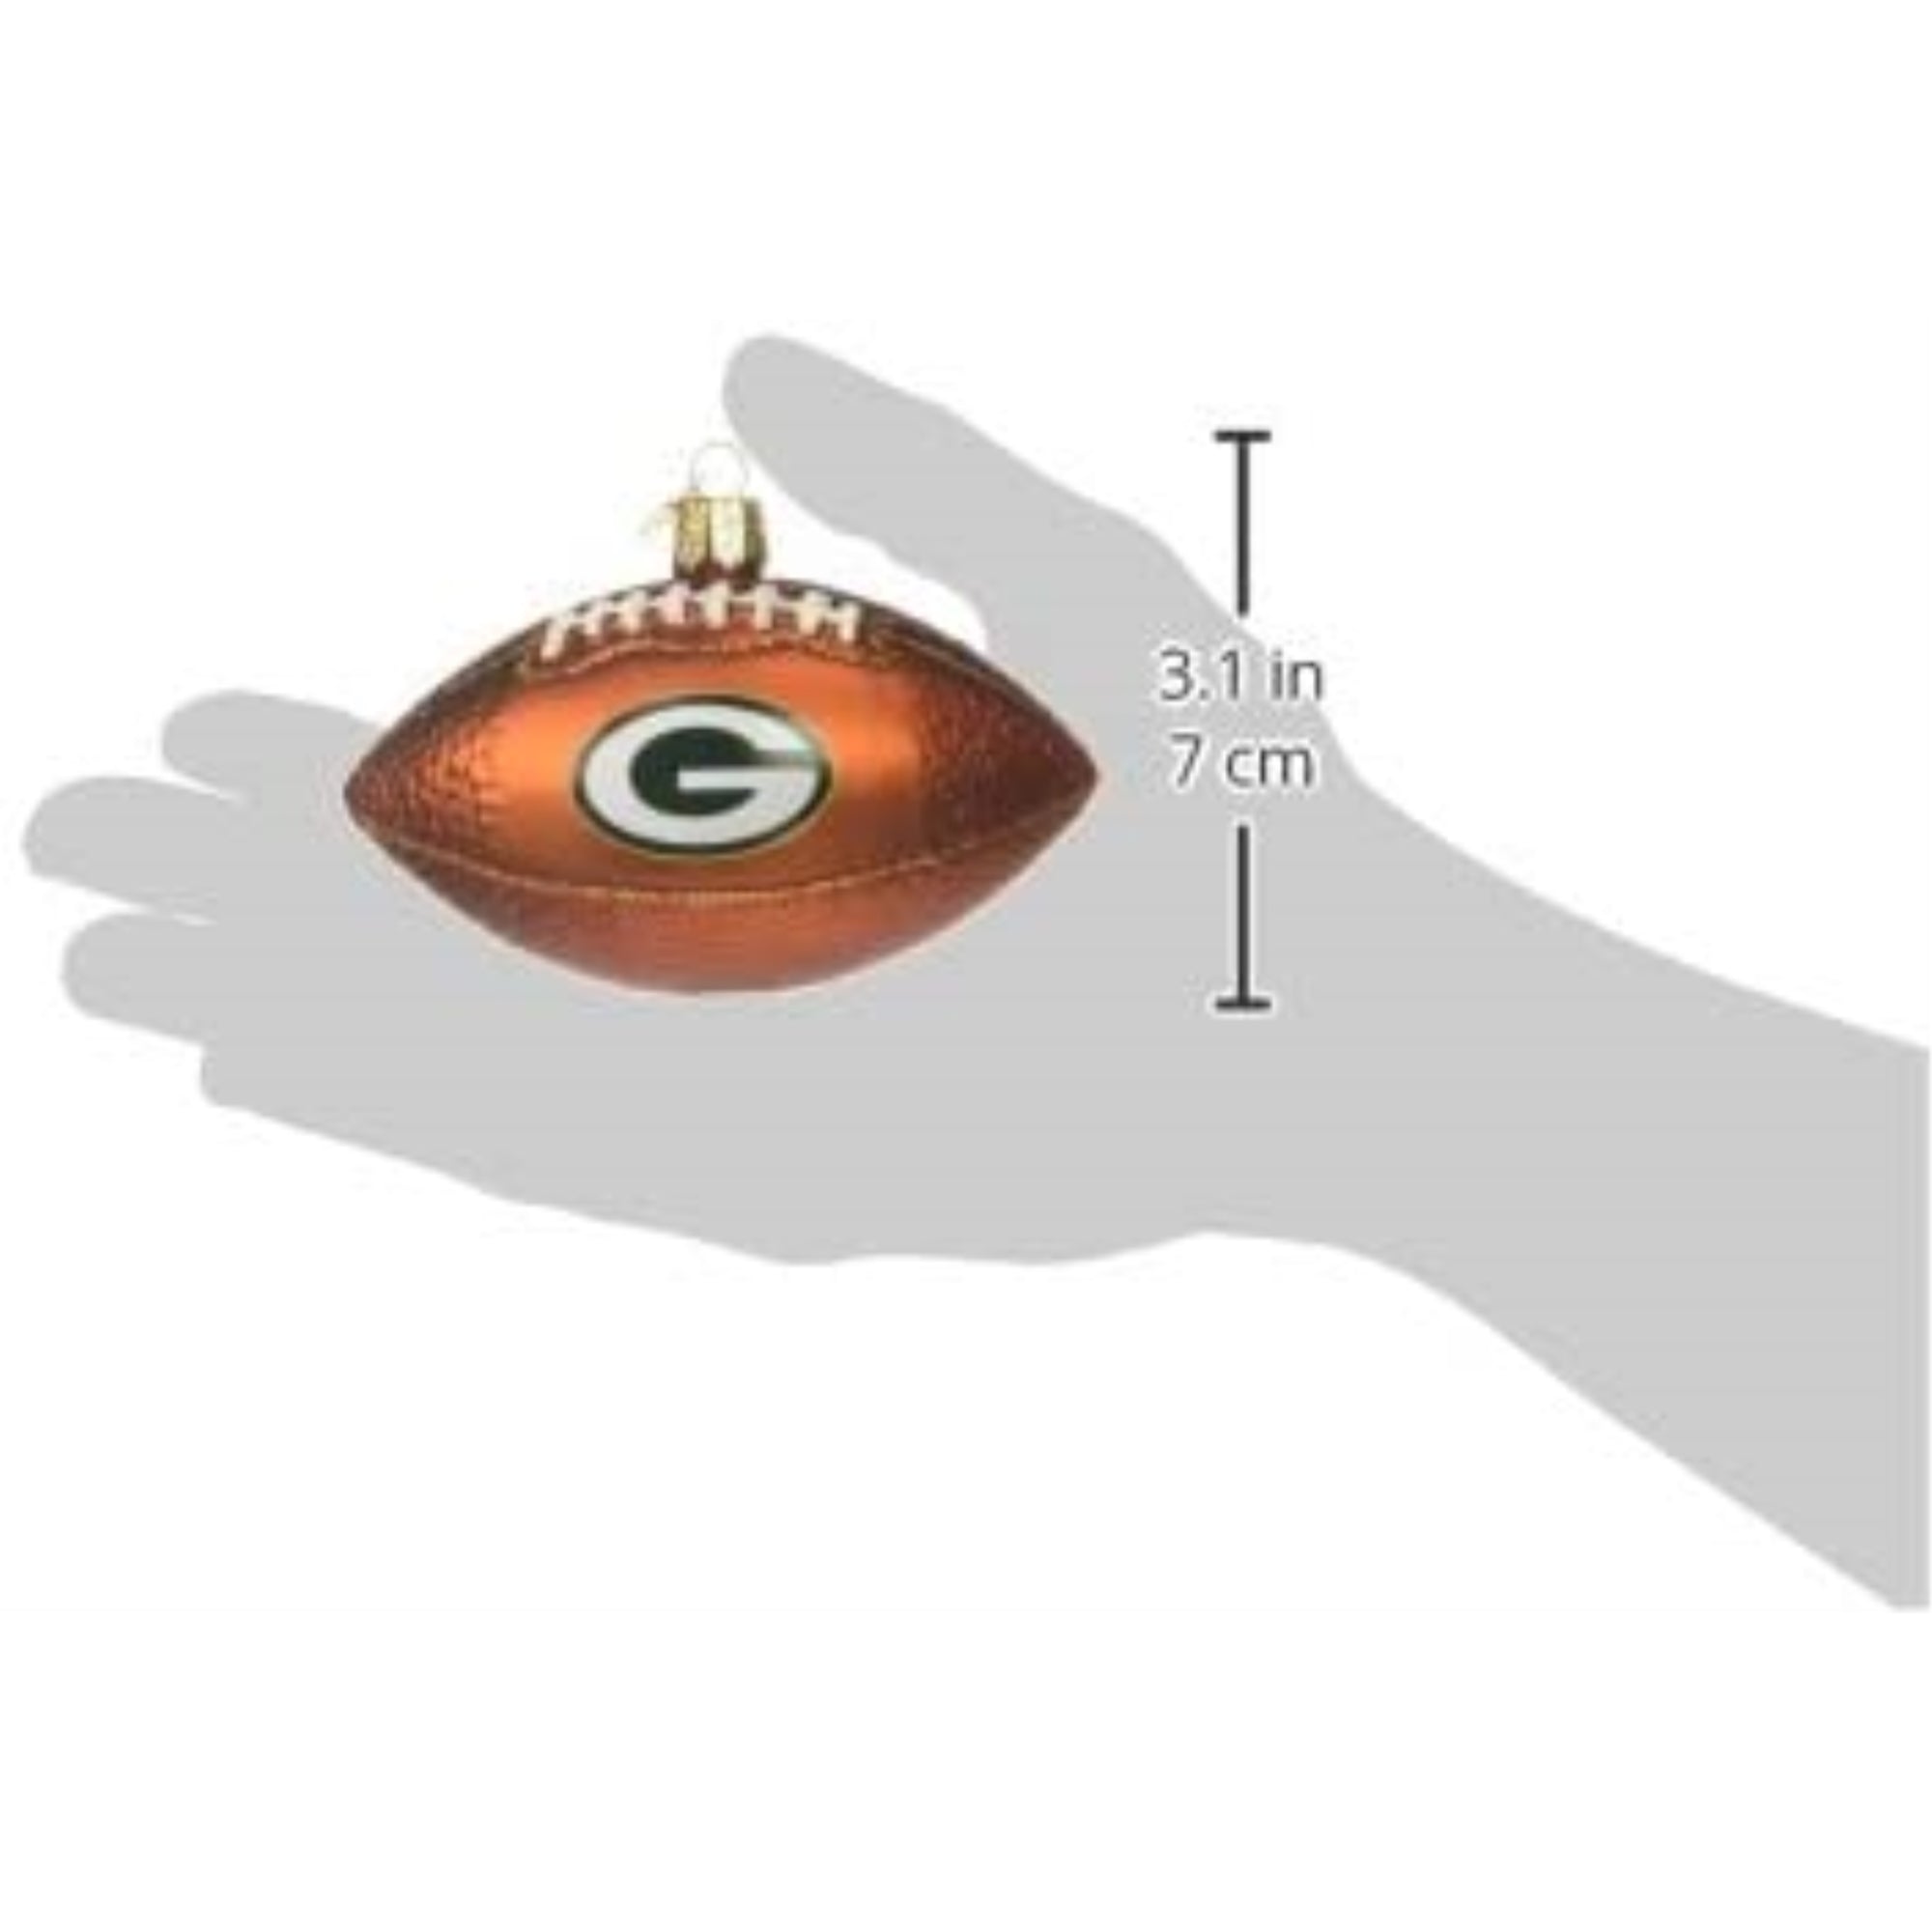 Old World Christmas Green Bay Packers Football Ornament For Christmas Tree